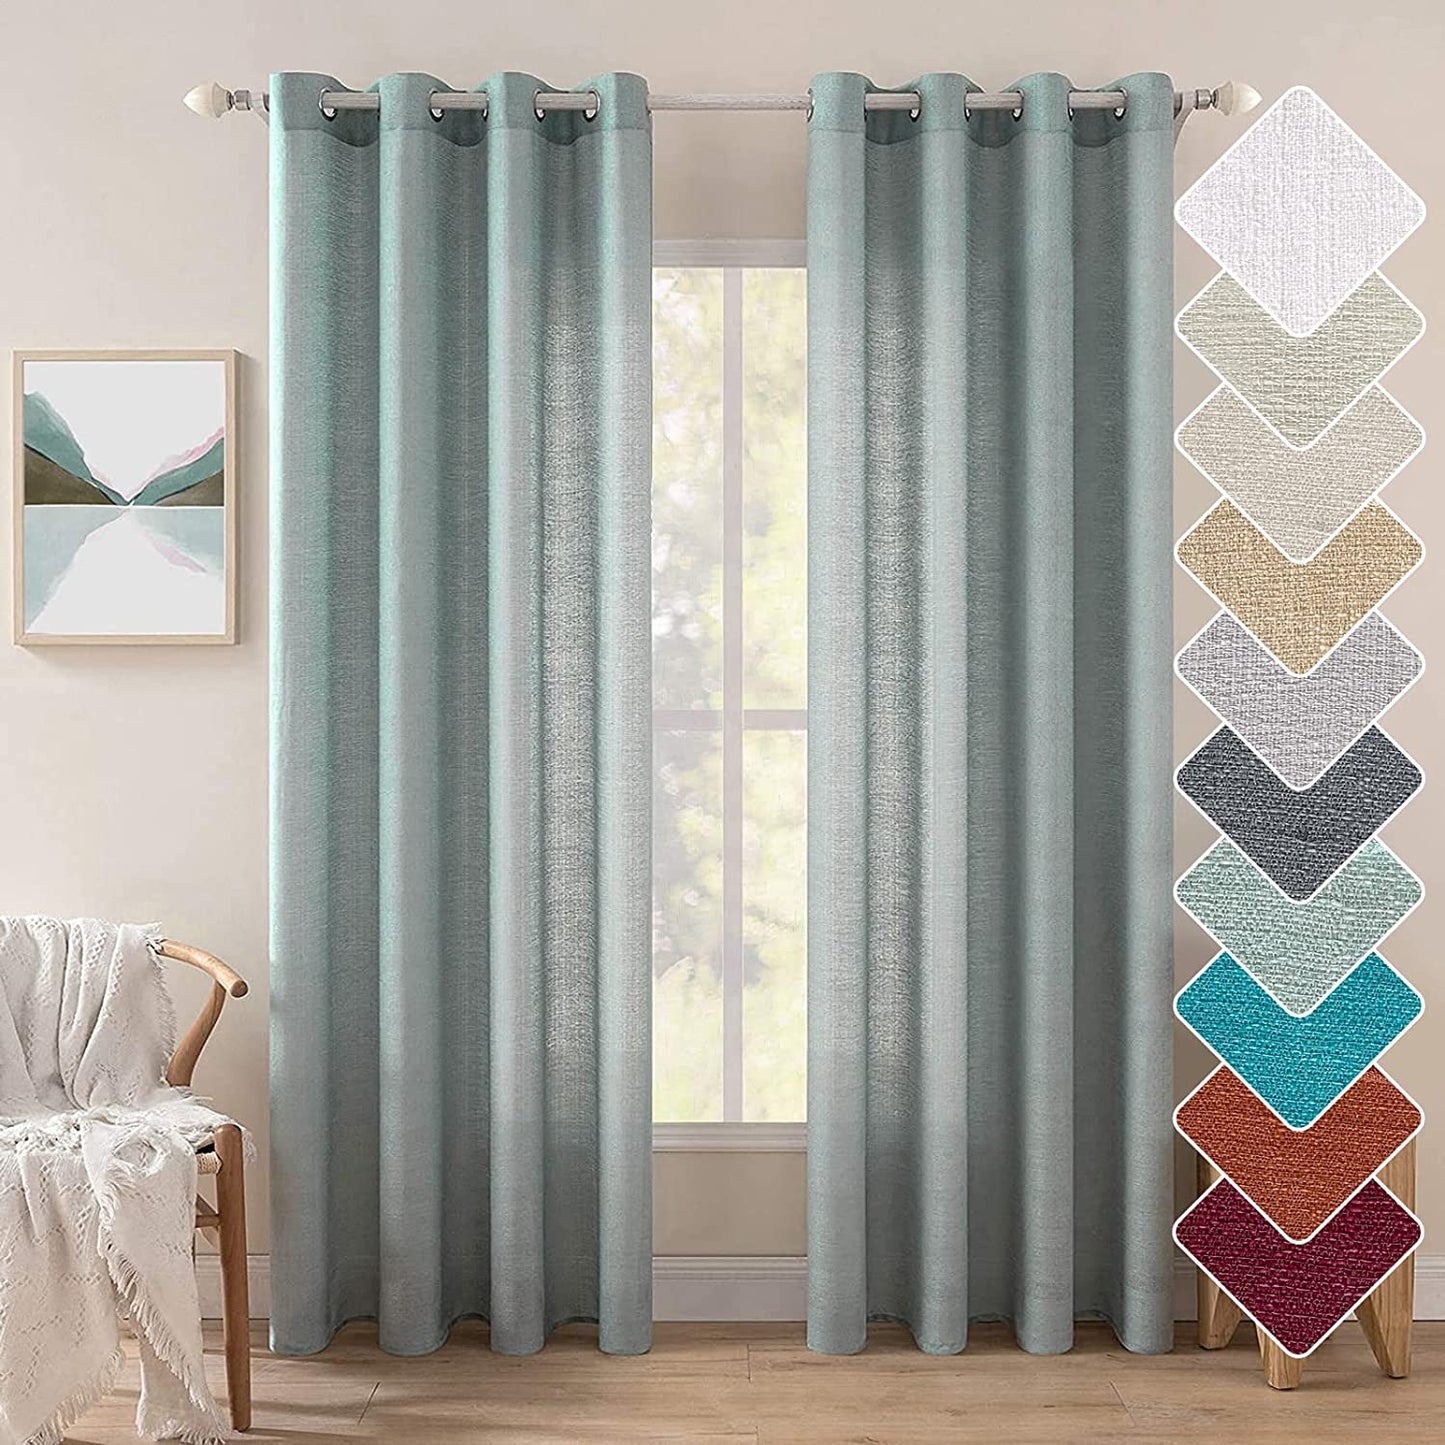 MIULEE Burnt Orange Linen Semi Sheer Curtains 2 Panels for Living Room Bedroom Linen Textured Light Filtering Privacy Window Curtains Terracotta Grommet Drapes Rust Boho Fall Decor W 52 X L 84 Inches  MIULEE Grommet | Teal Green W52 X L96 